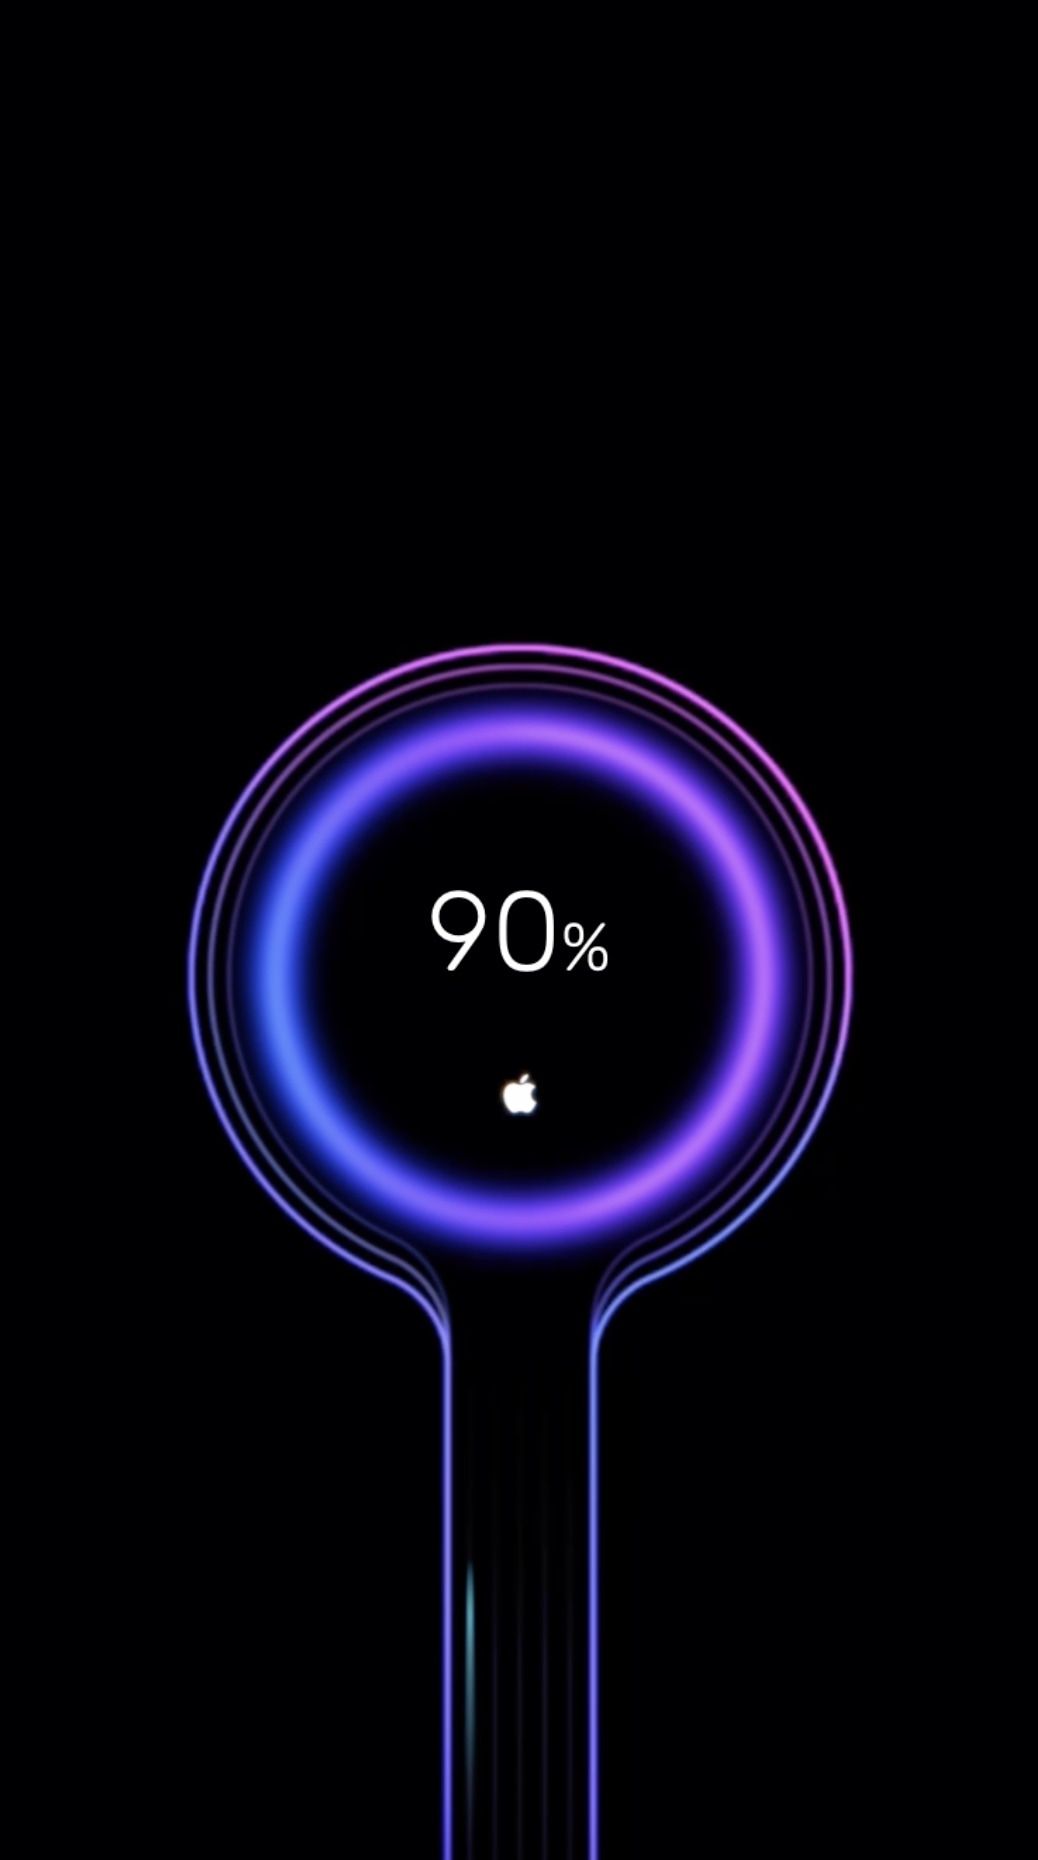 ChargeAnimation brings a plethora of new charging animations to iOS